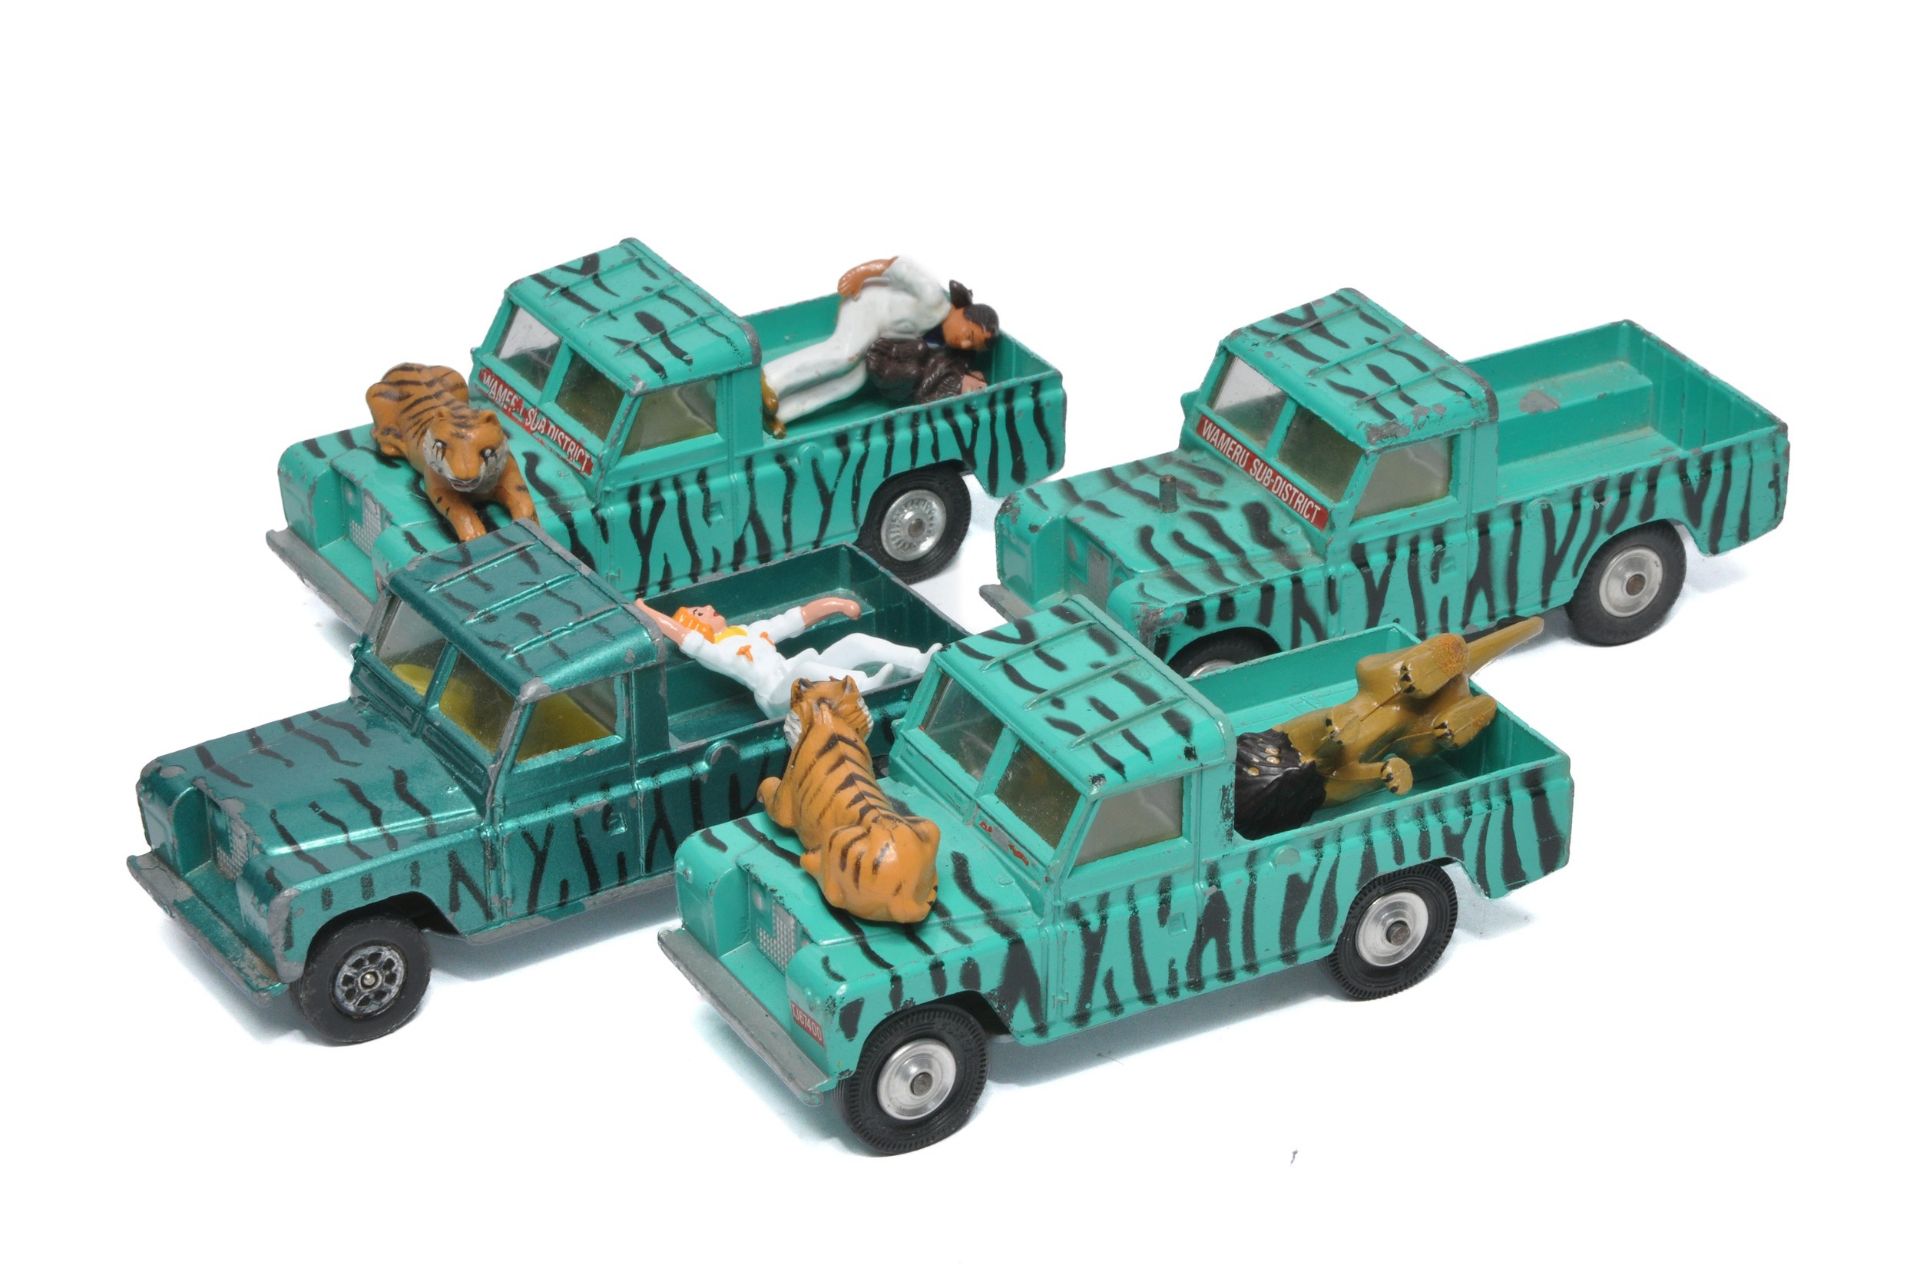 Corgi group of various loose diecast issues including 4 x Safari Land Rovers. One is Whizzwheels